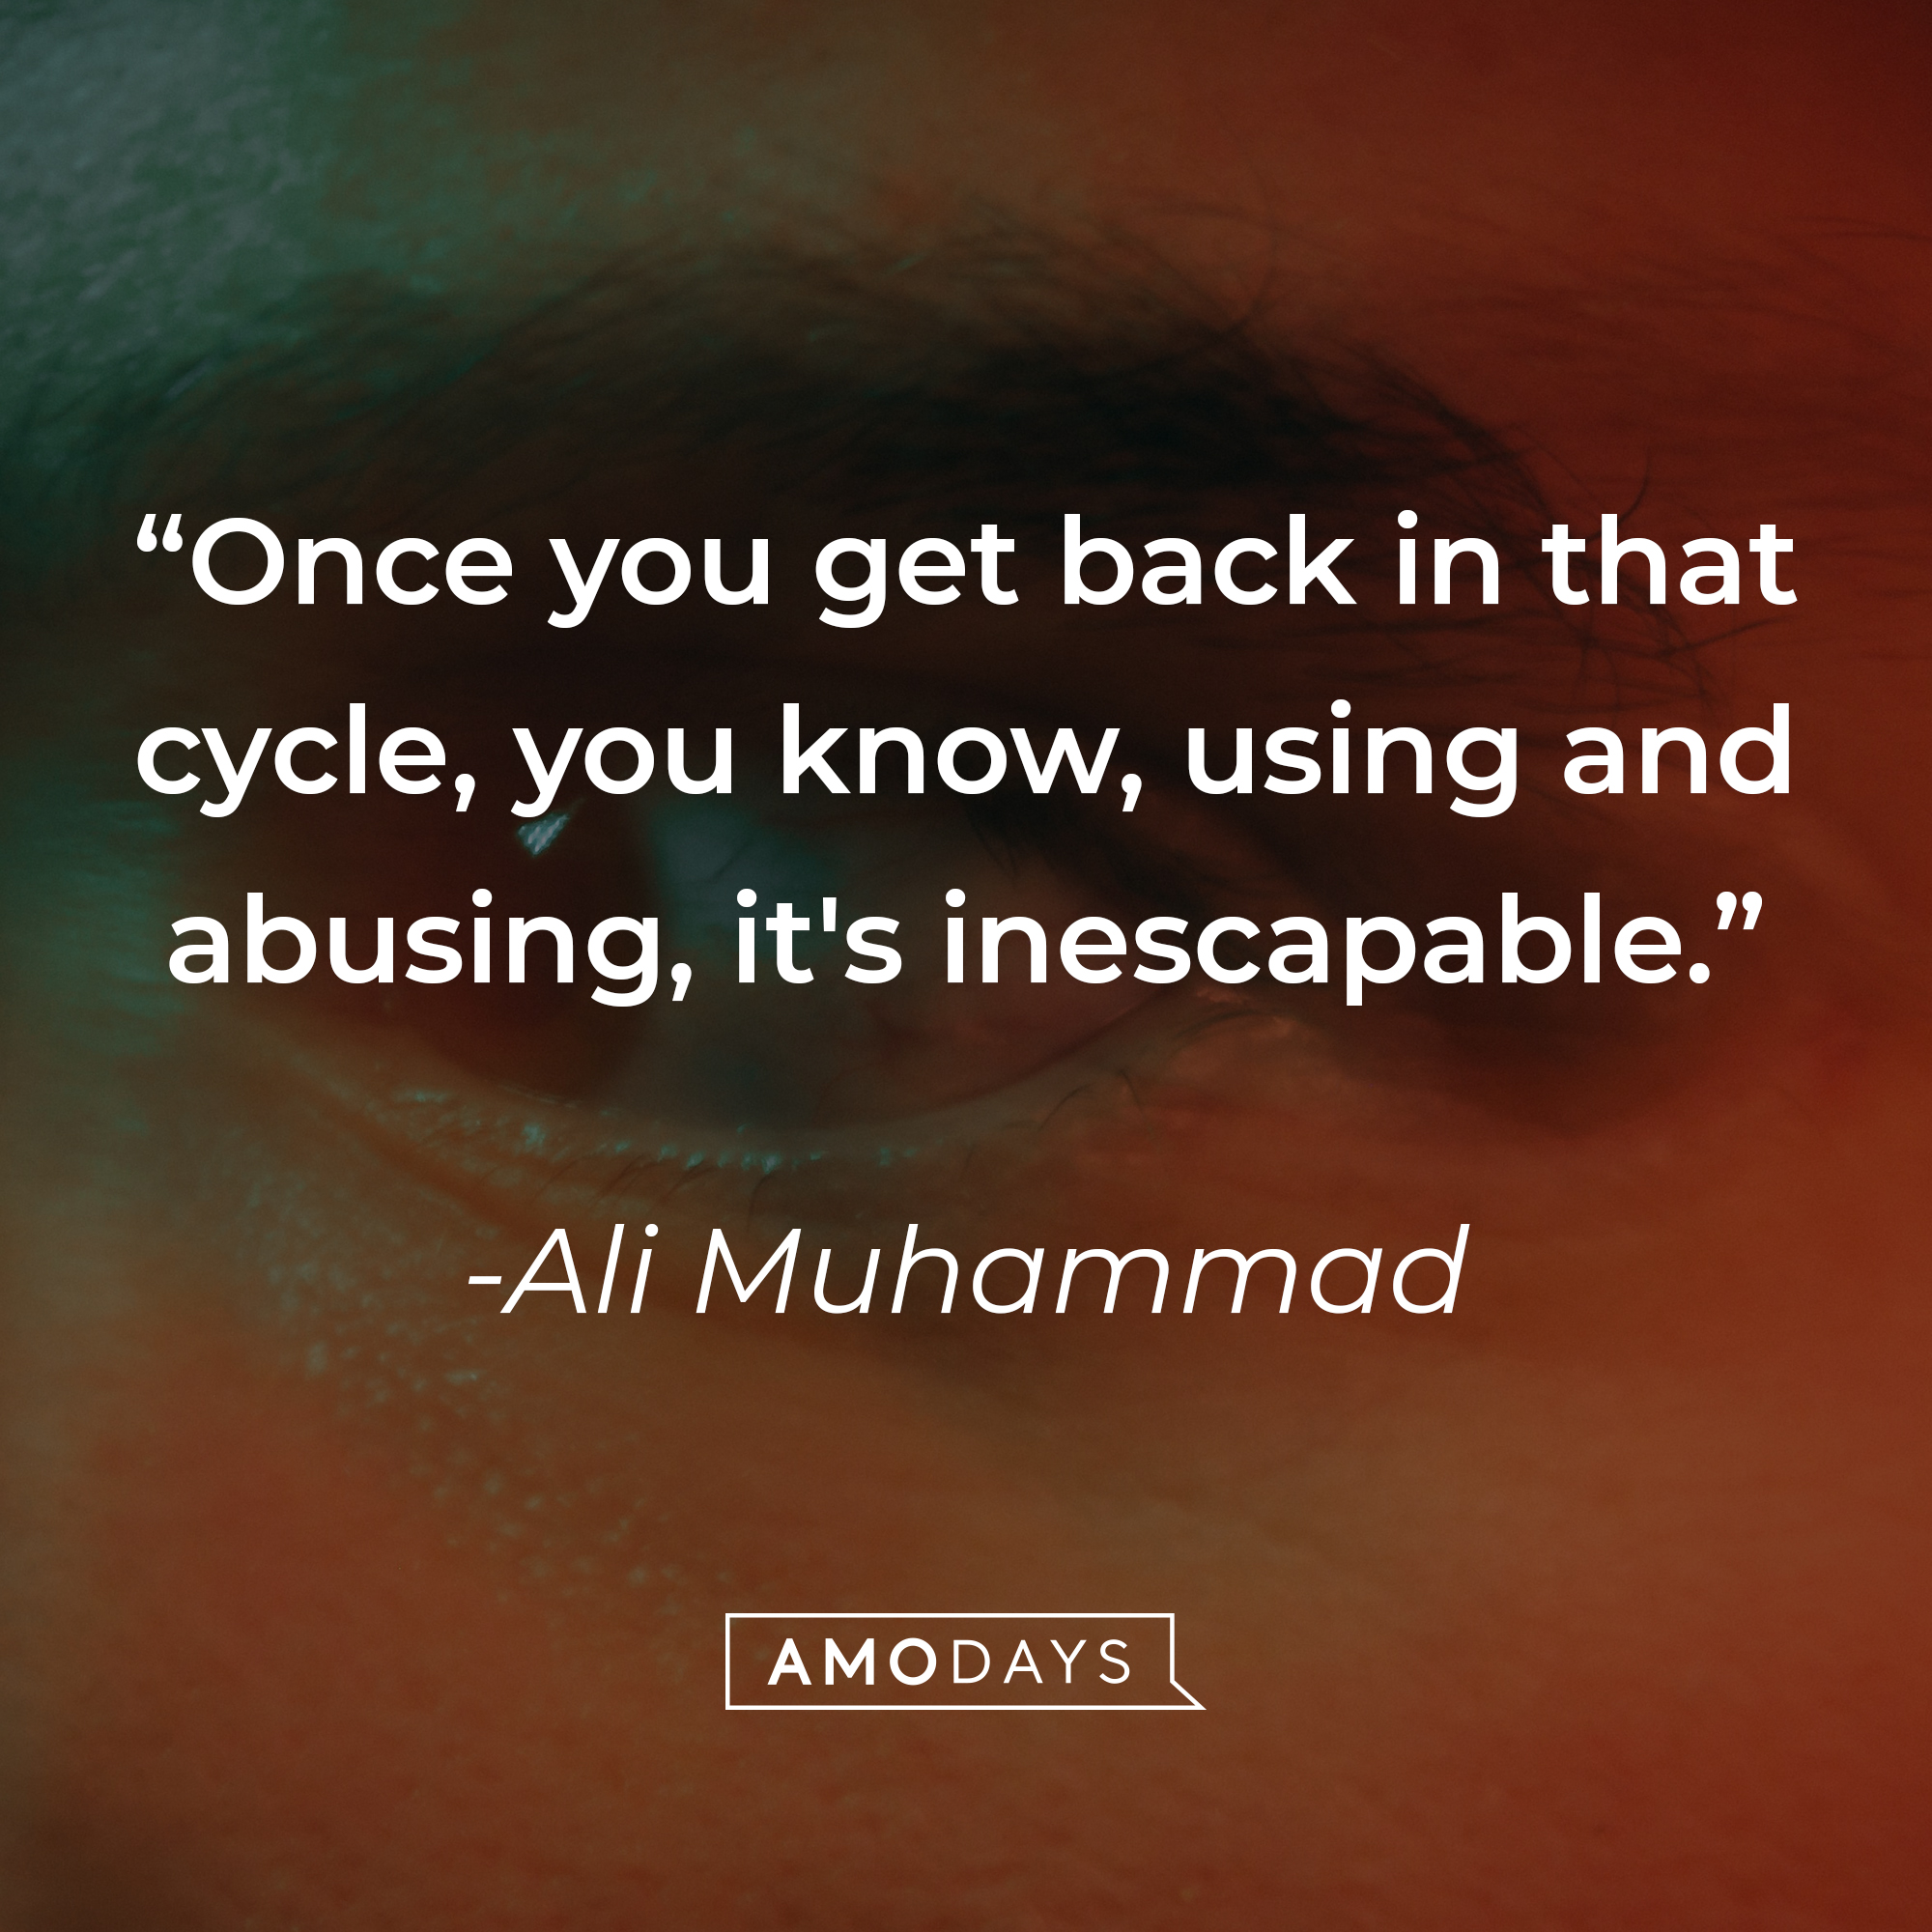 Ali Muhammad's quote: "Once you get back in that cycle, you know, using and abusing, it's inescapable." | Source: unsplash.com